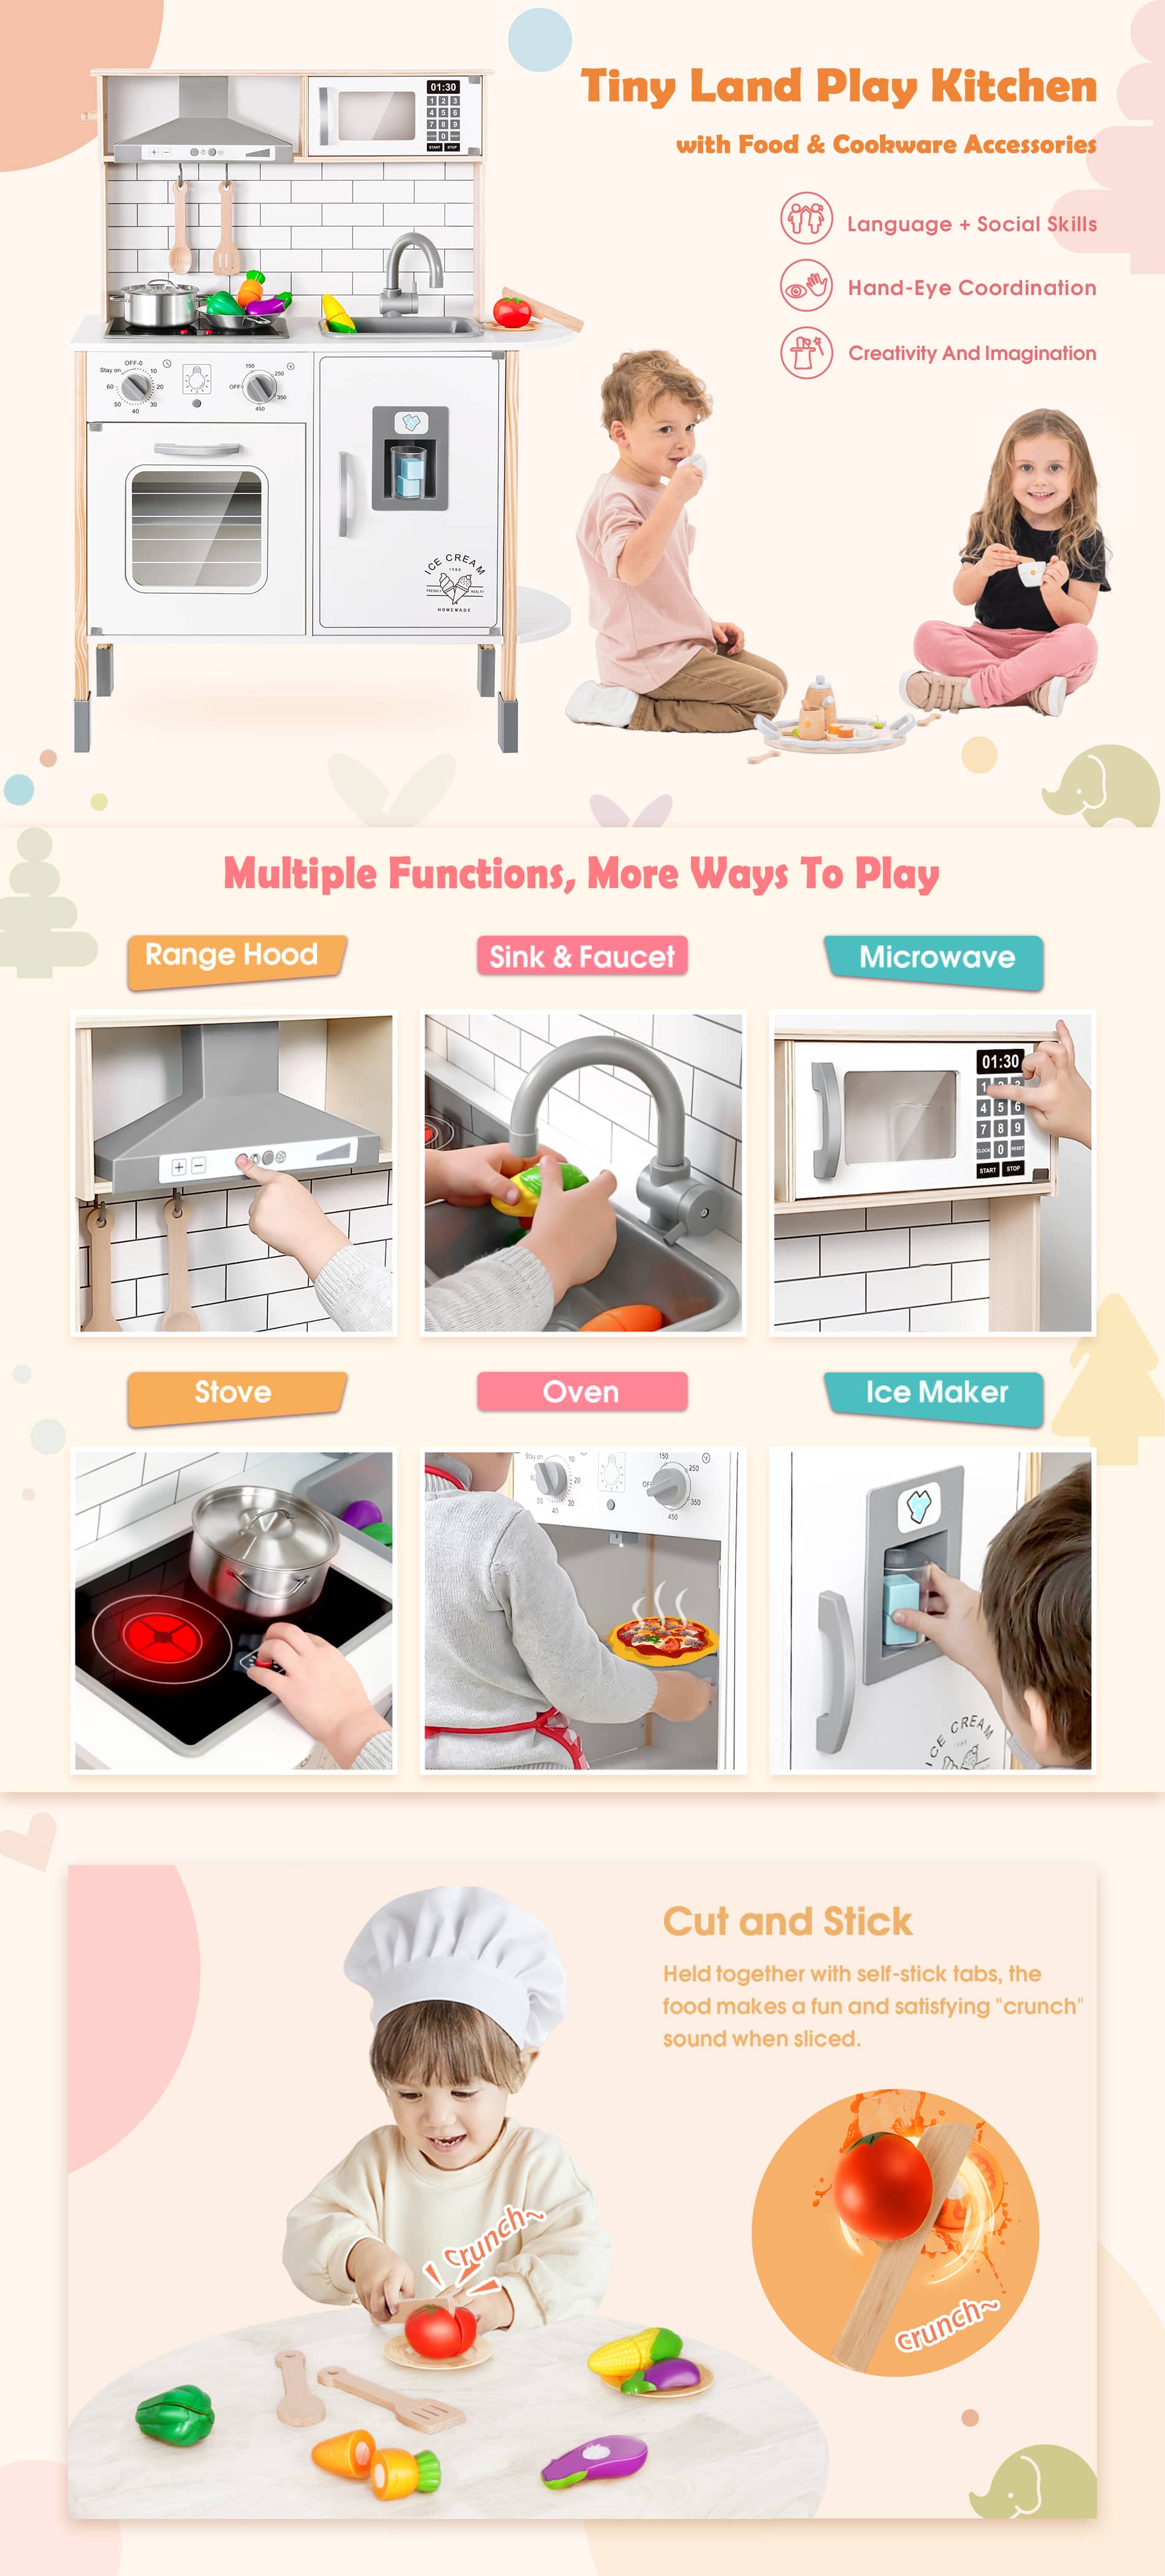 Play Kitchen with 18 Pcs Toy Food & Cookware Accessories Product Details